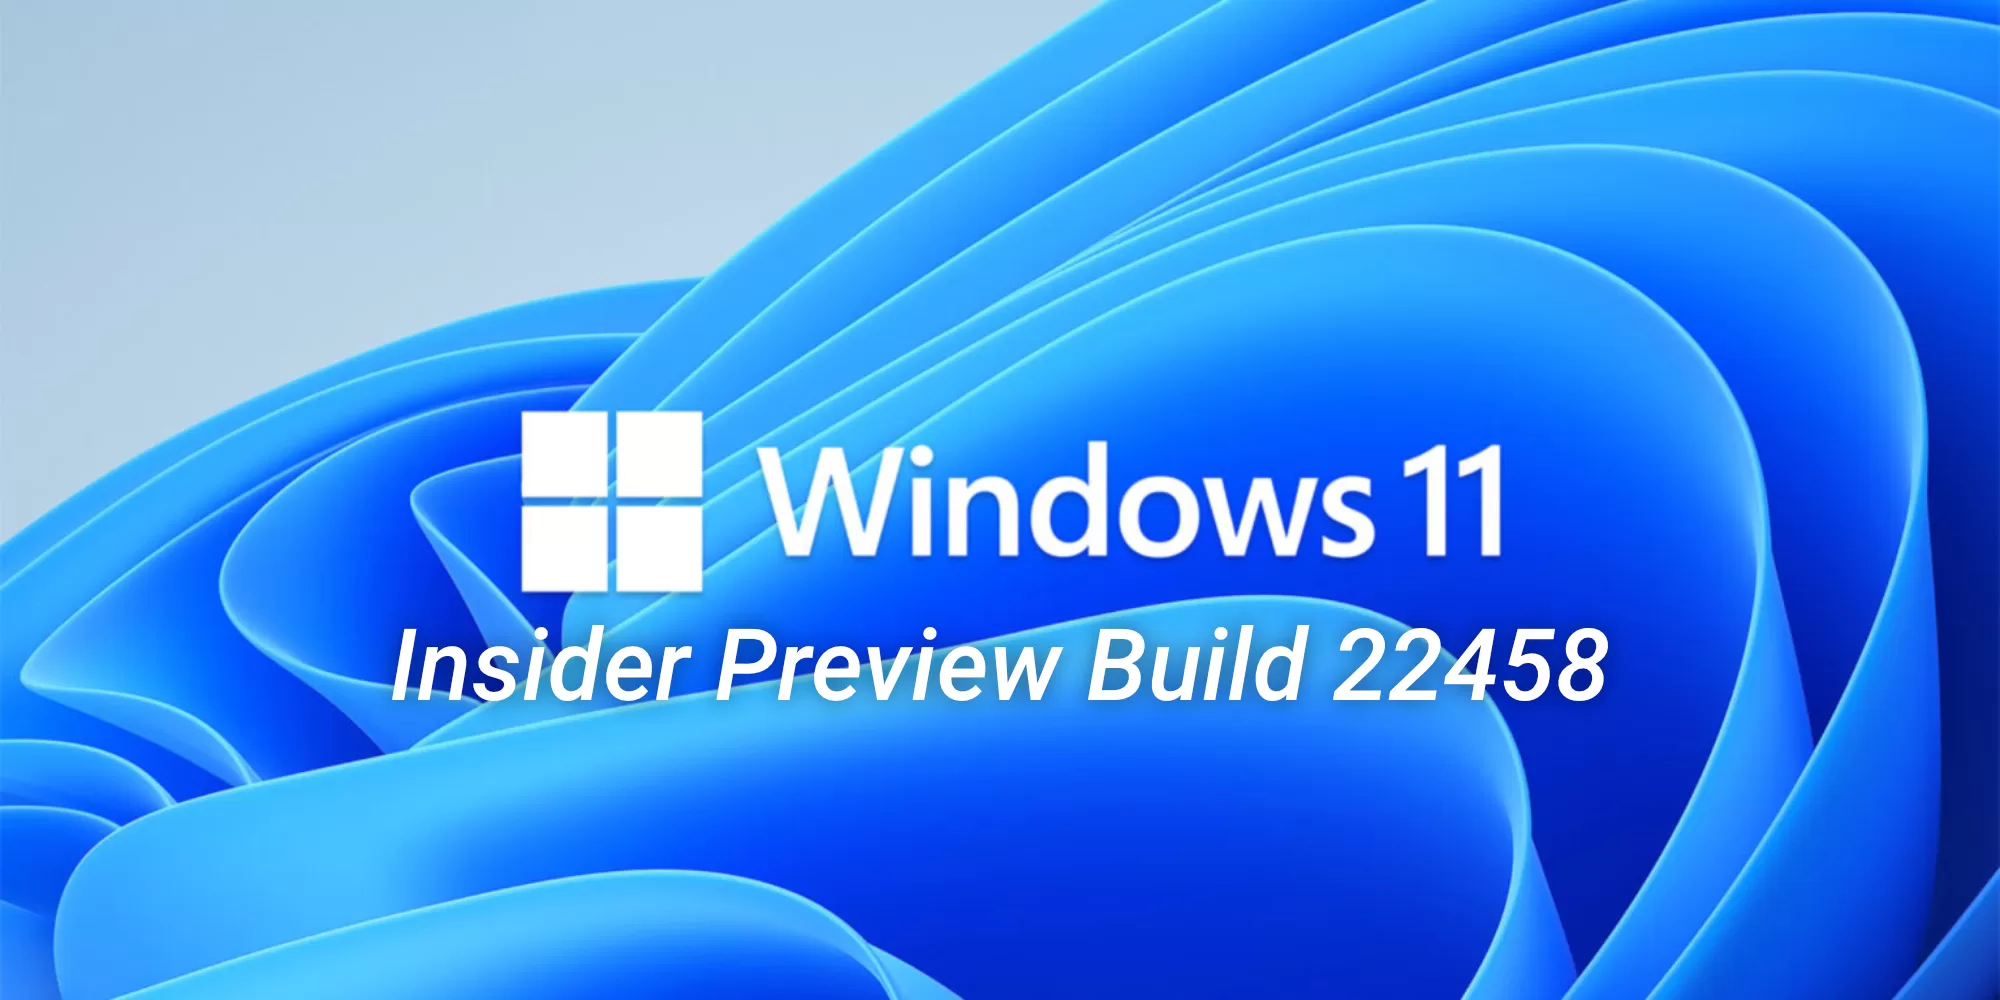 Windows 11 Insider Preview Build 22458 brings bug fixes, new tips app